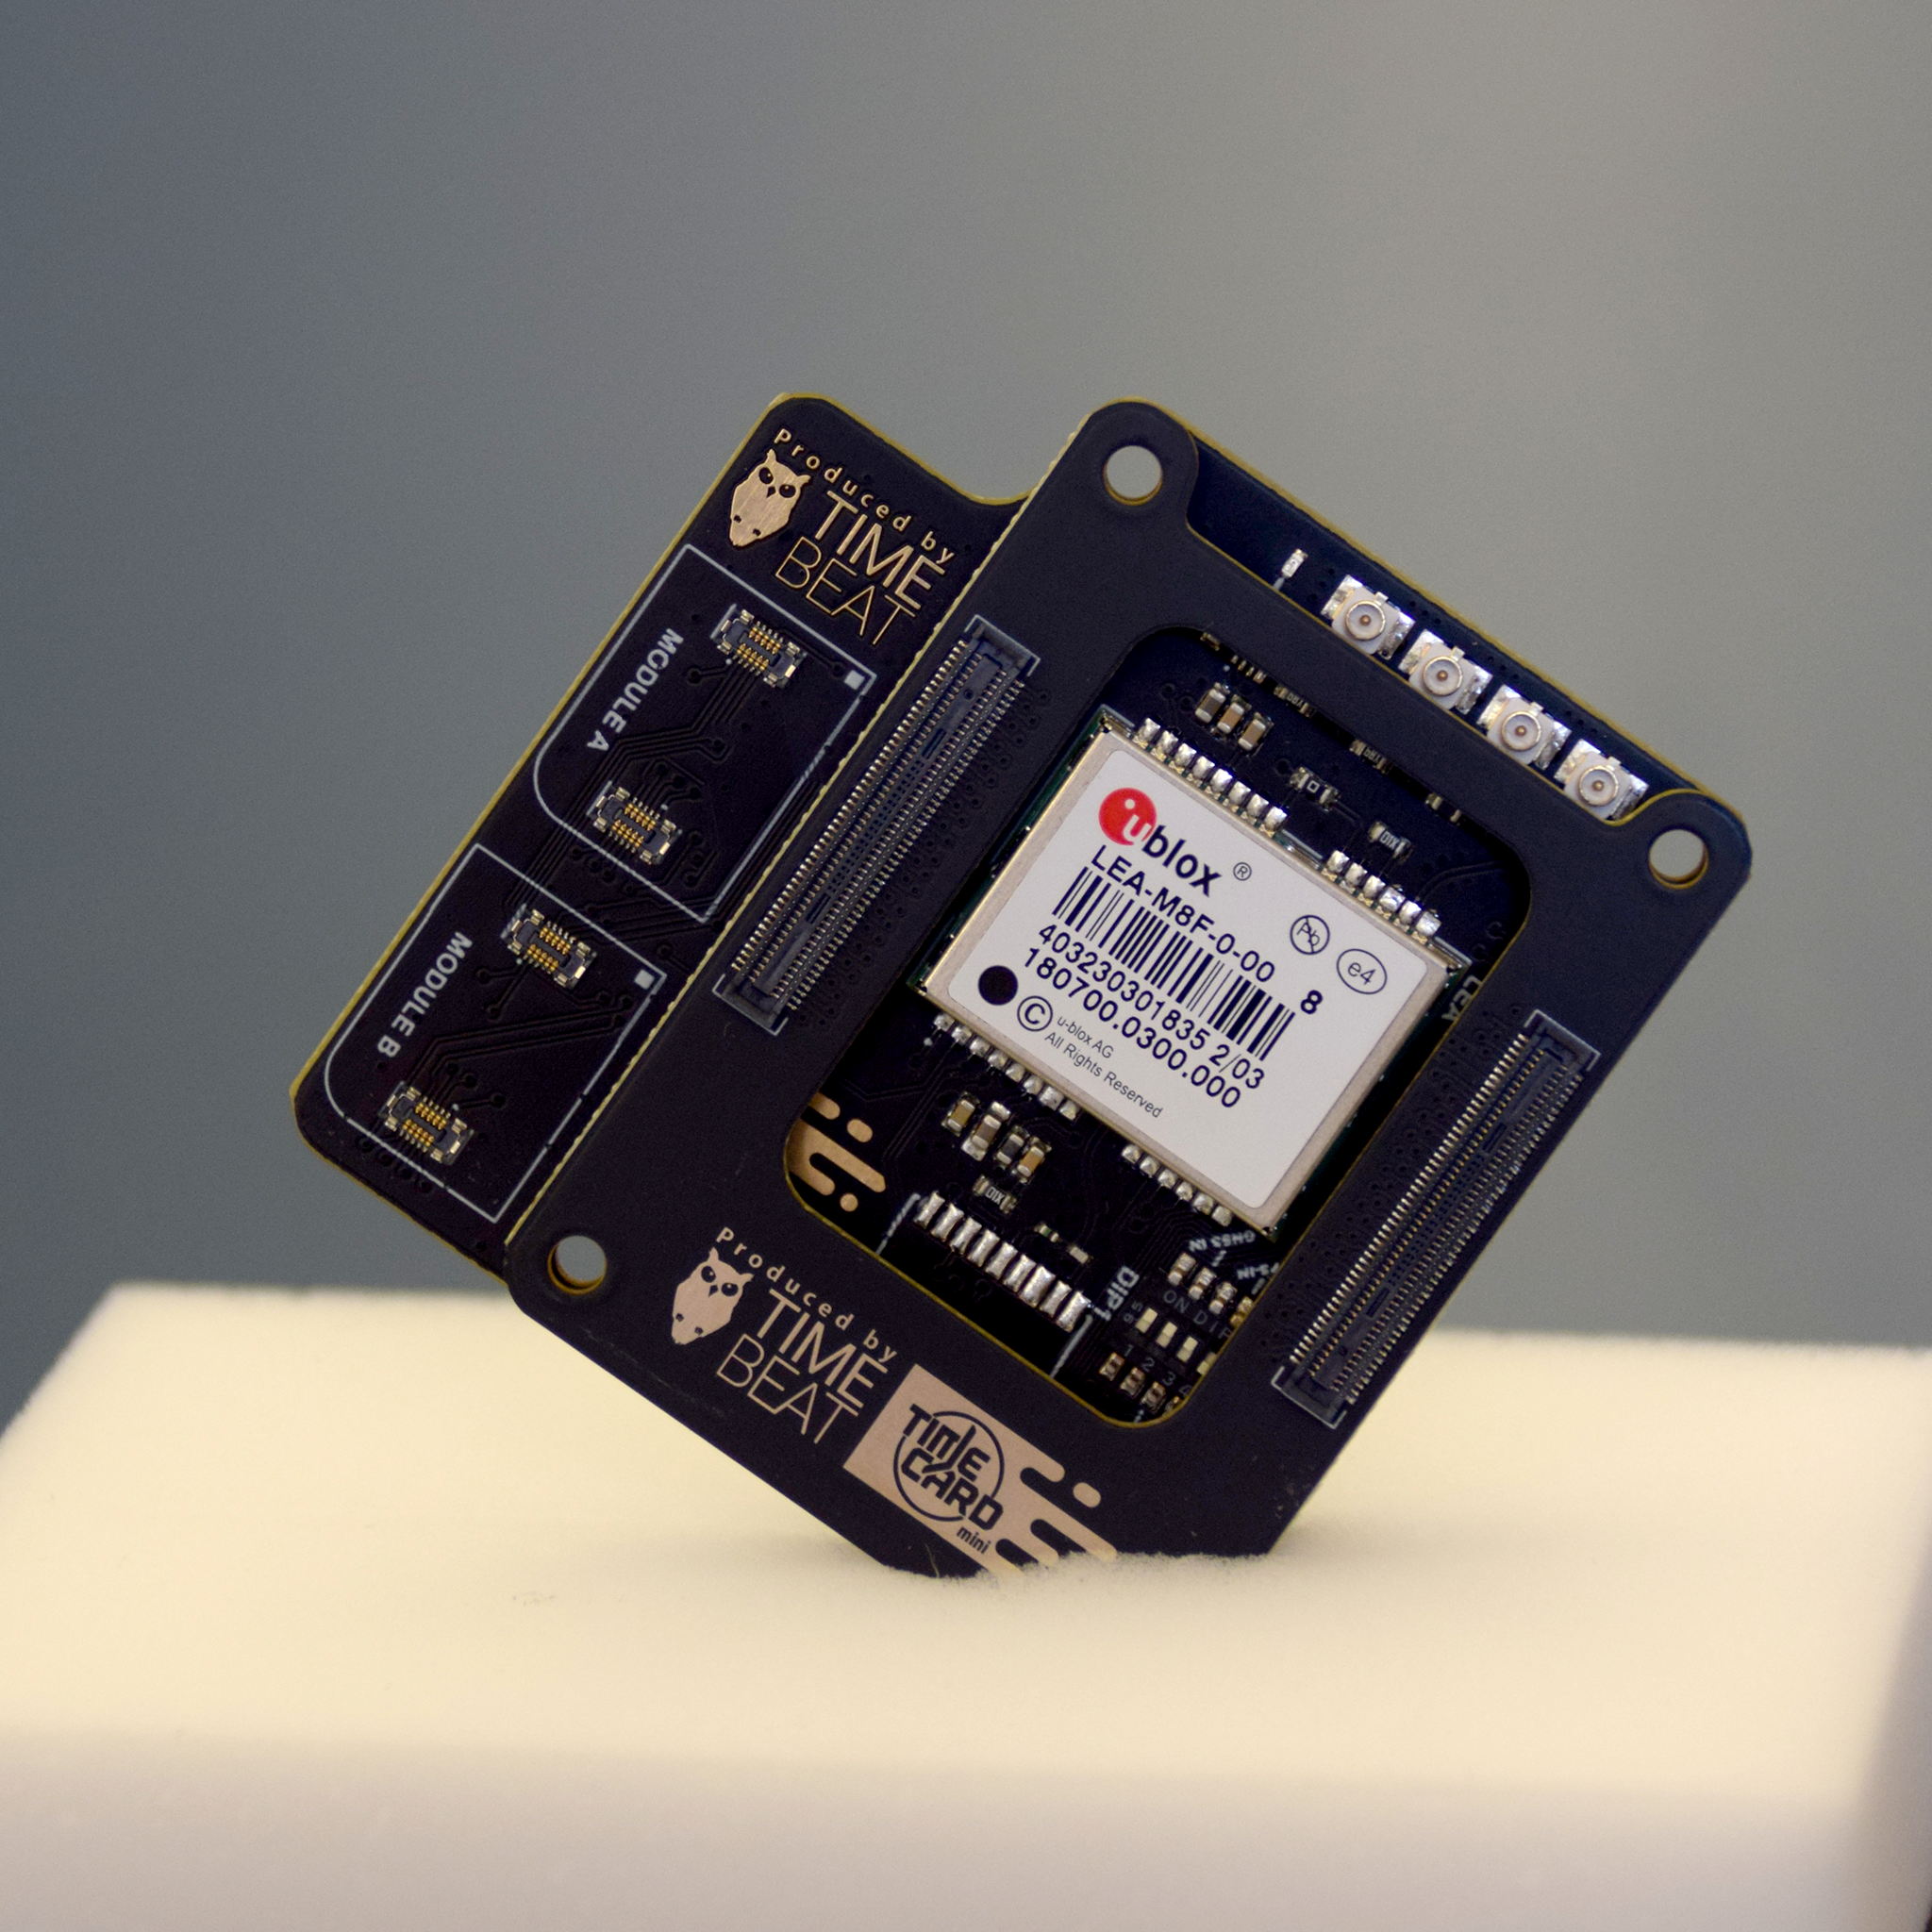 Timebeat GNSS Module for Raspberry Pi CM4. Enterprise grade GPS, GNSS, Beidou, Galileo Satellite time and position